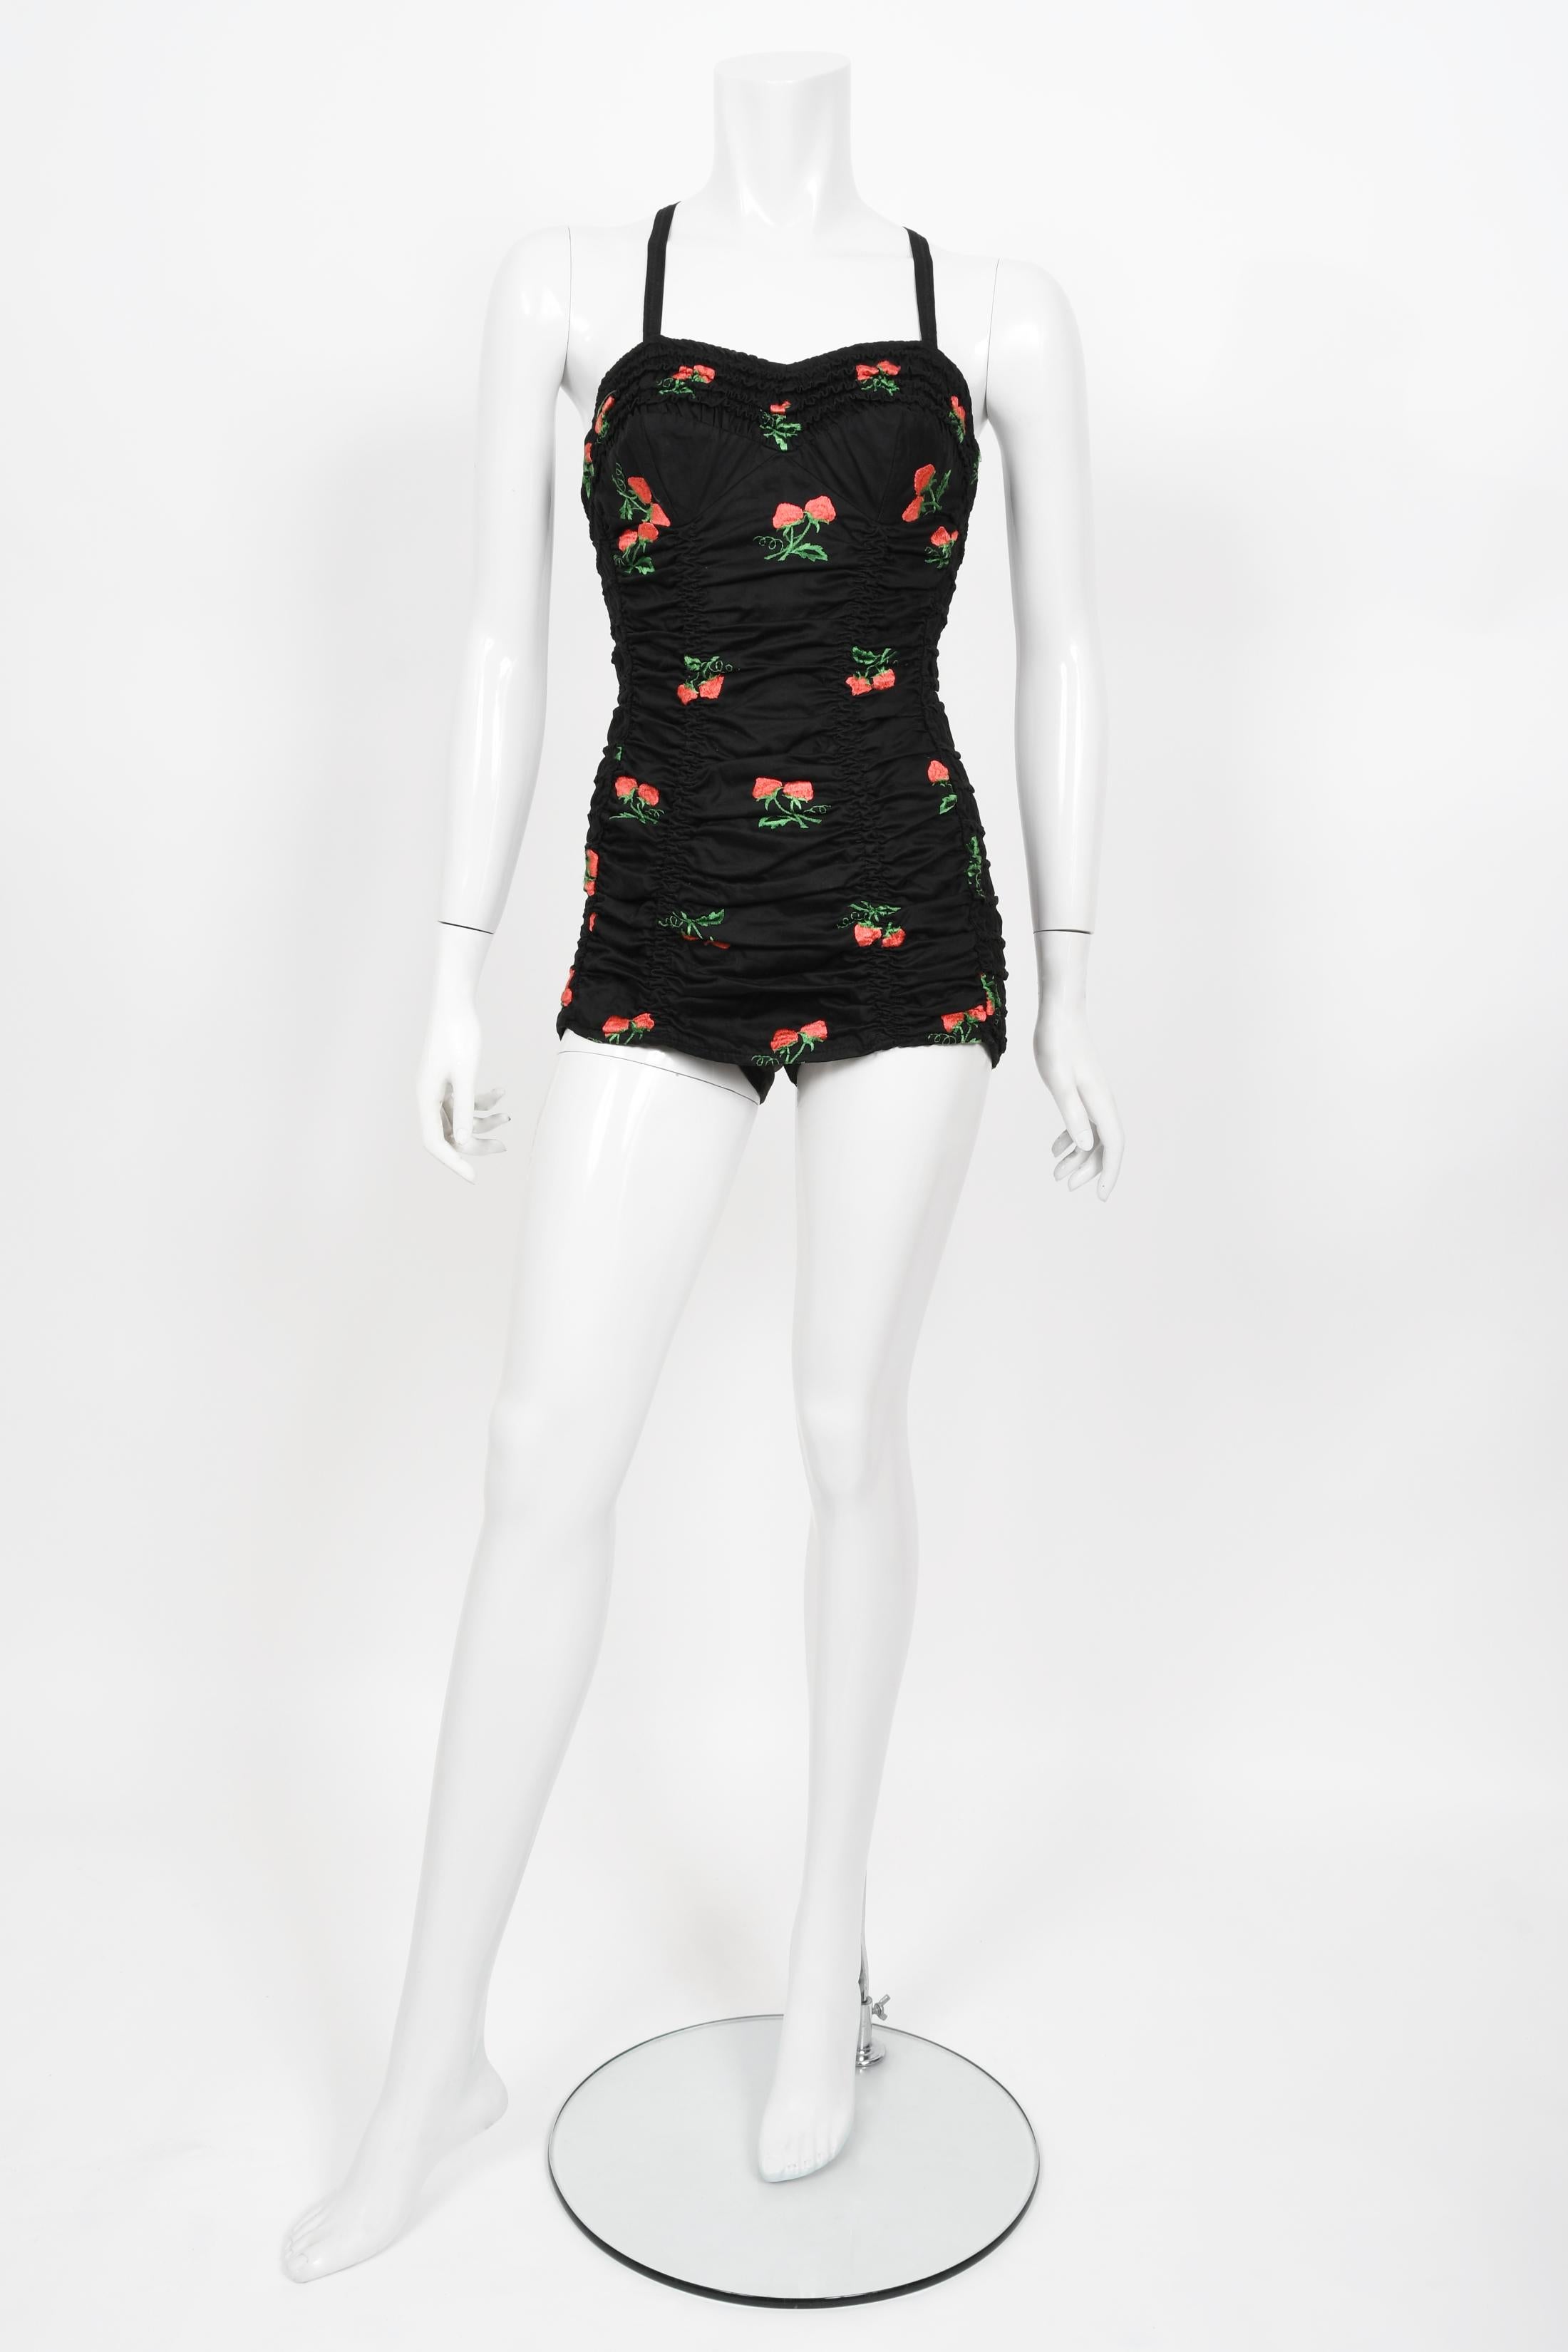 2200px x 3300px - Vintage 1950s Swimsuit - 8 For Sale on 1stDibs | swimsuit 1950s, fifties  swimsuit, vintage 1950s swimsuits